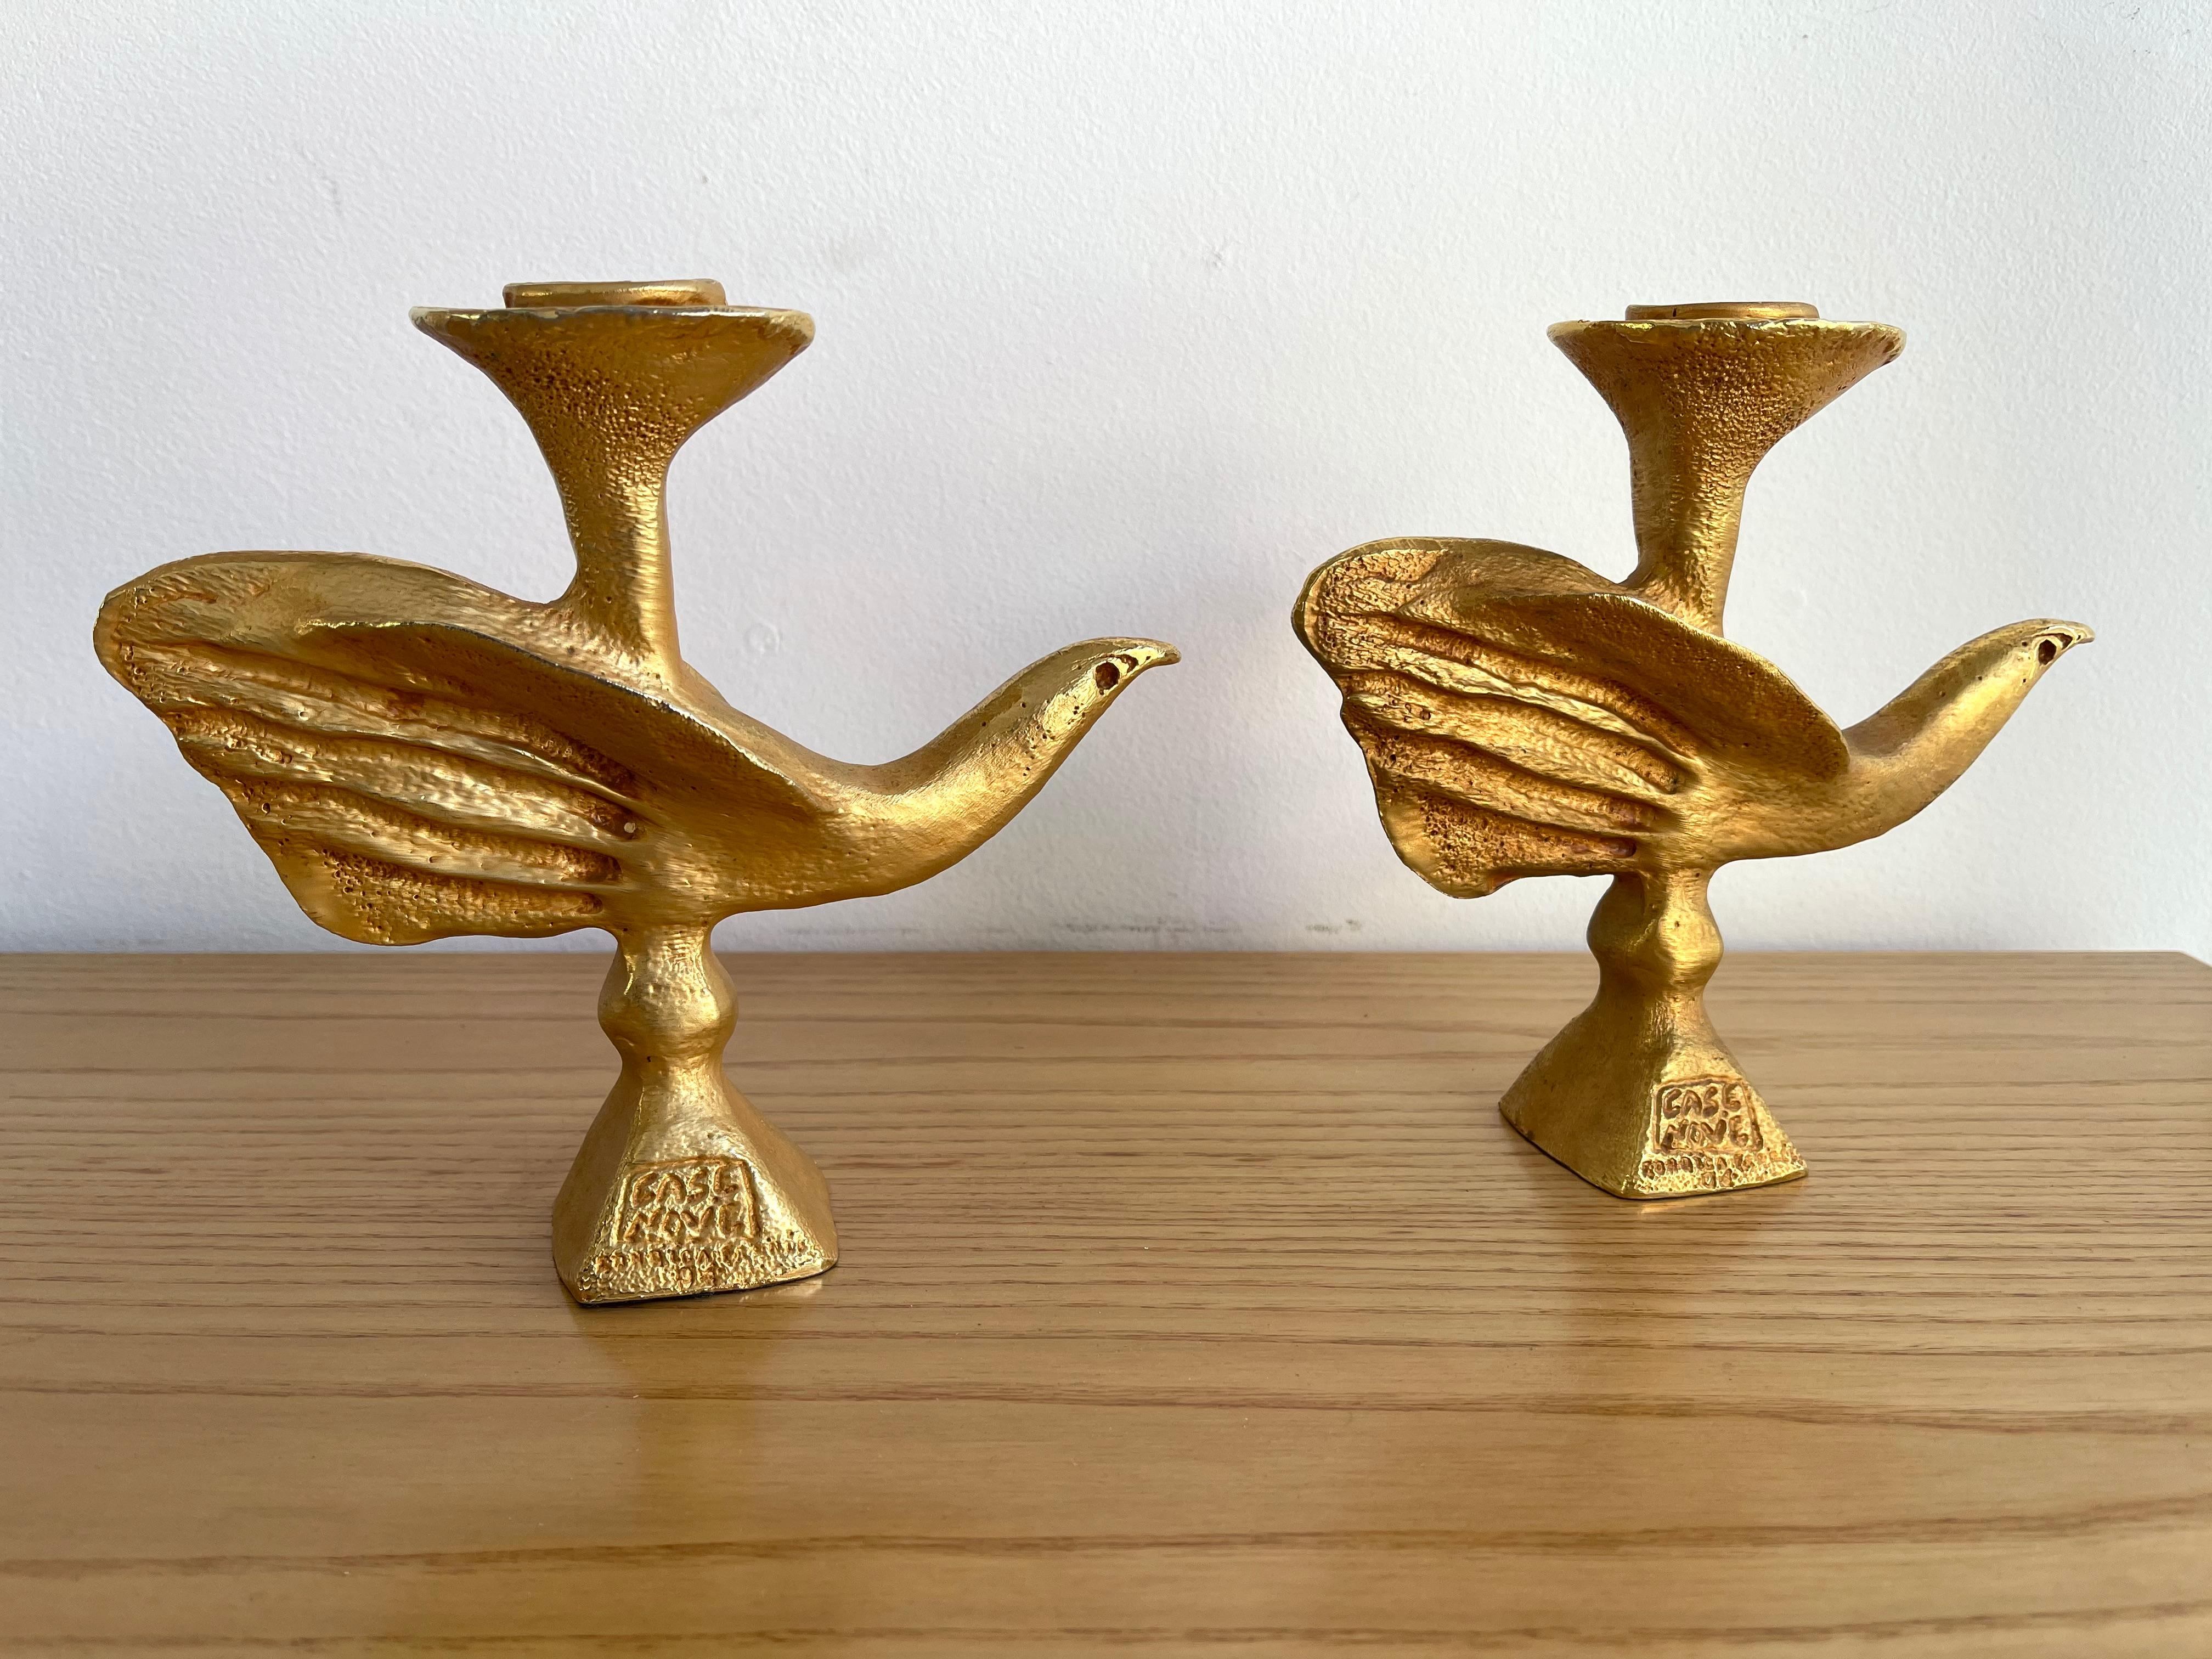 Late 20th Century Pair of Gilt Bird Candle Holders by Pierre Casenove for Fondica, France, 1980s